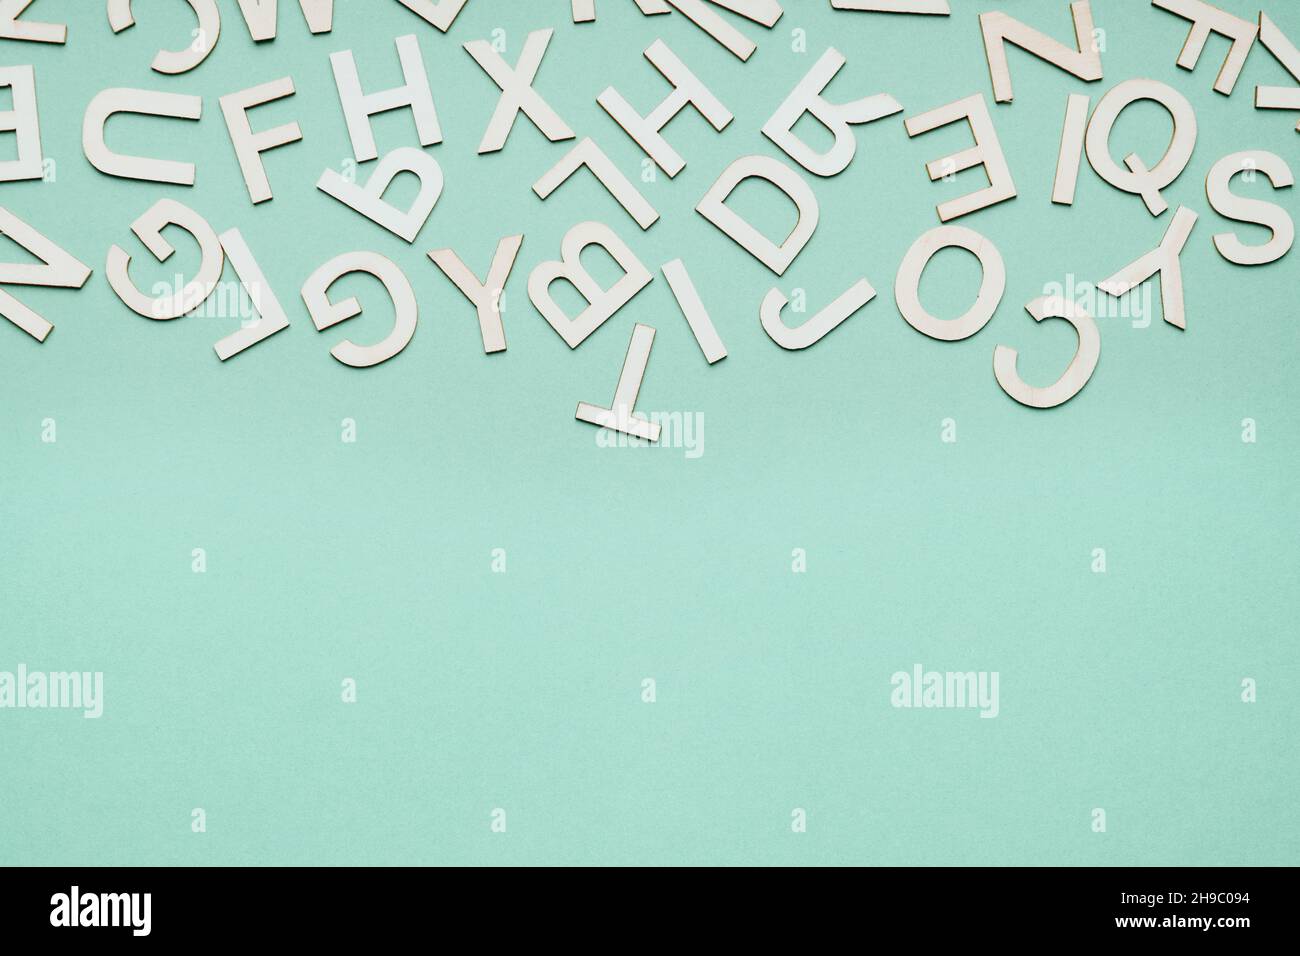 jumble of wooden letters falling down on blue paper background Stock Photo